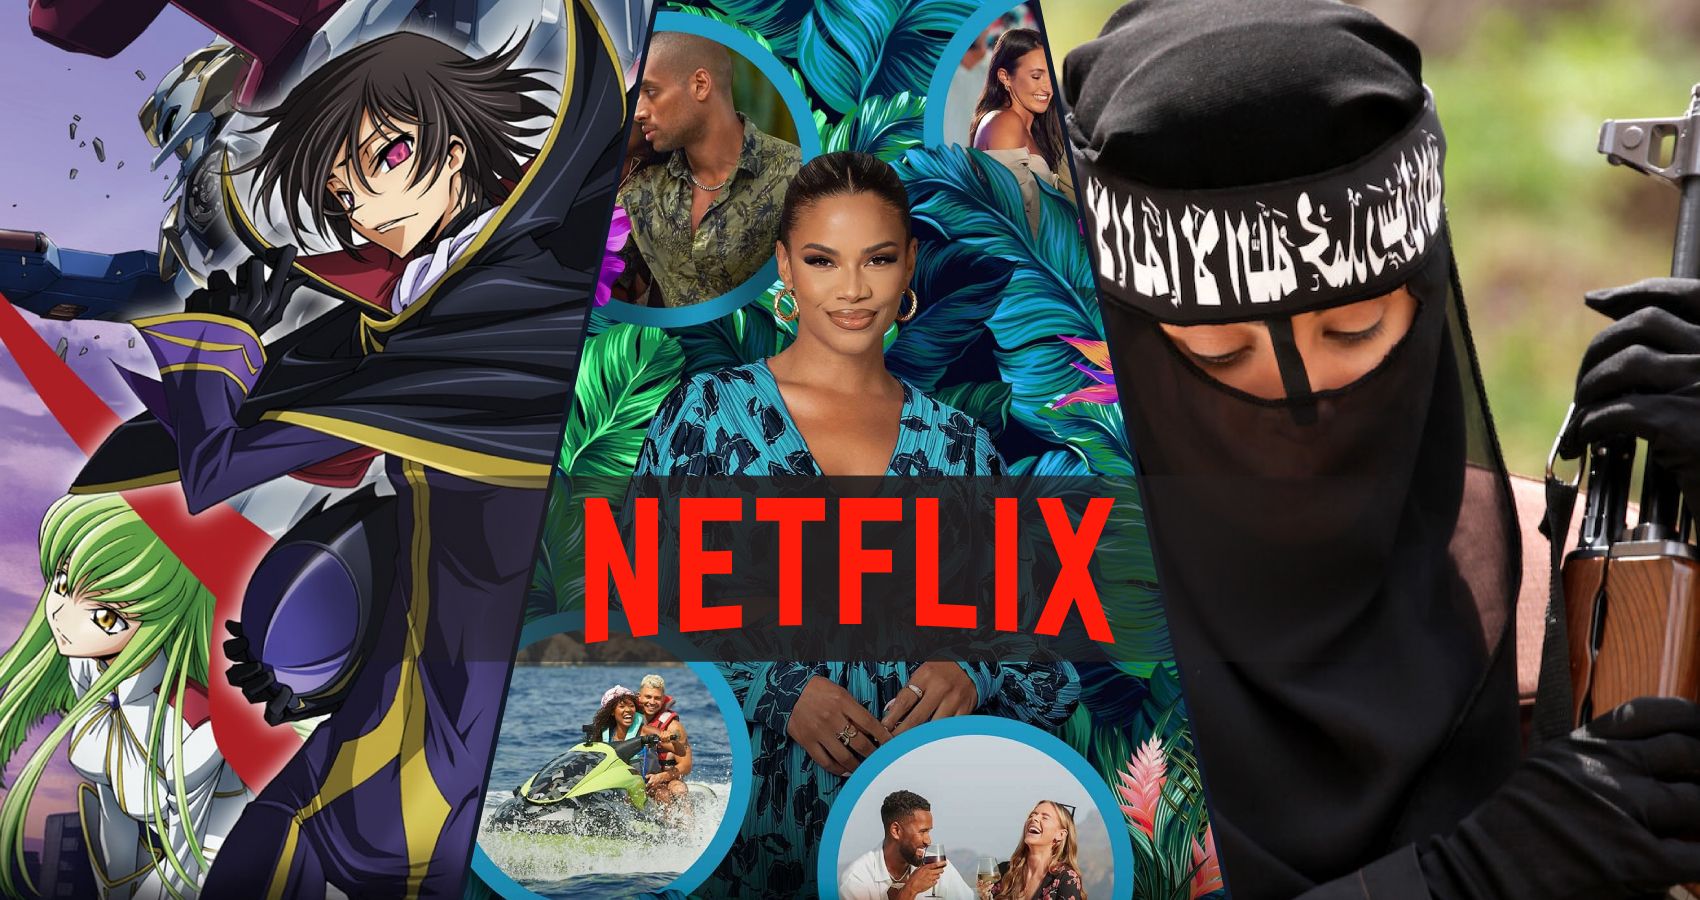 Multiple Big Anime Series Leaving Netflix in May 2022